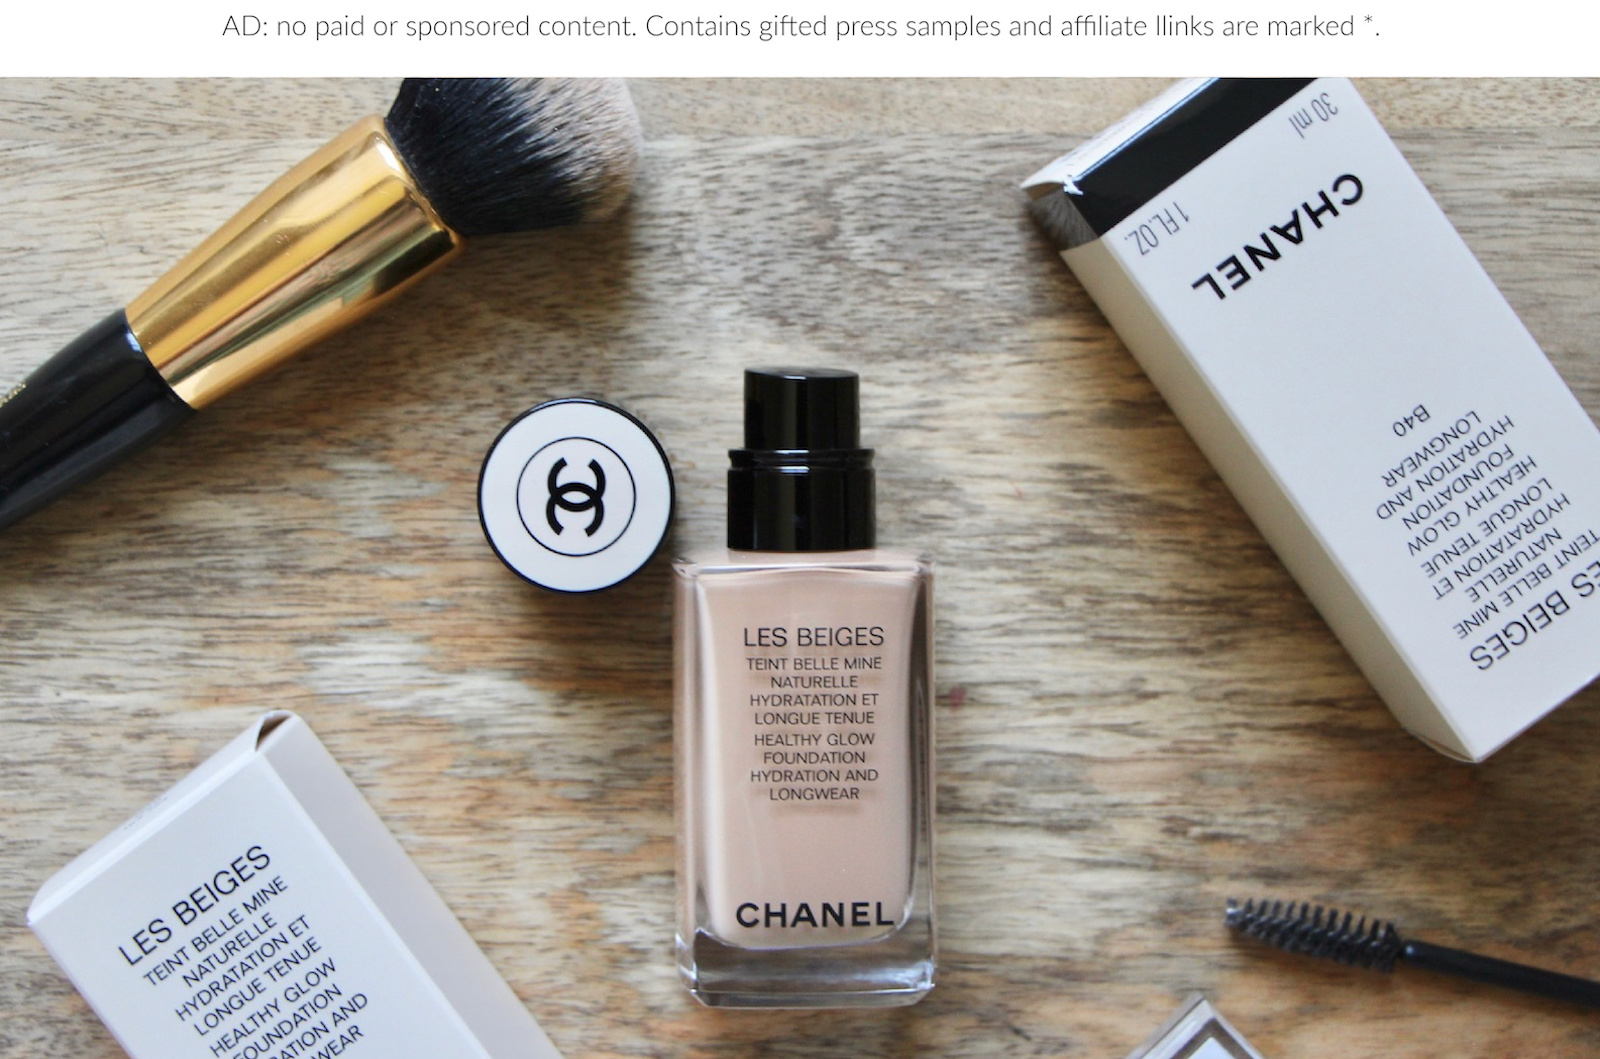 Review Chanel Les Beiges Healthy Glow Foundation SPF25 PA